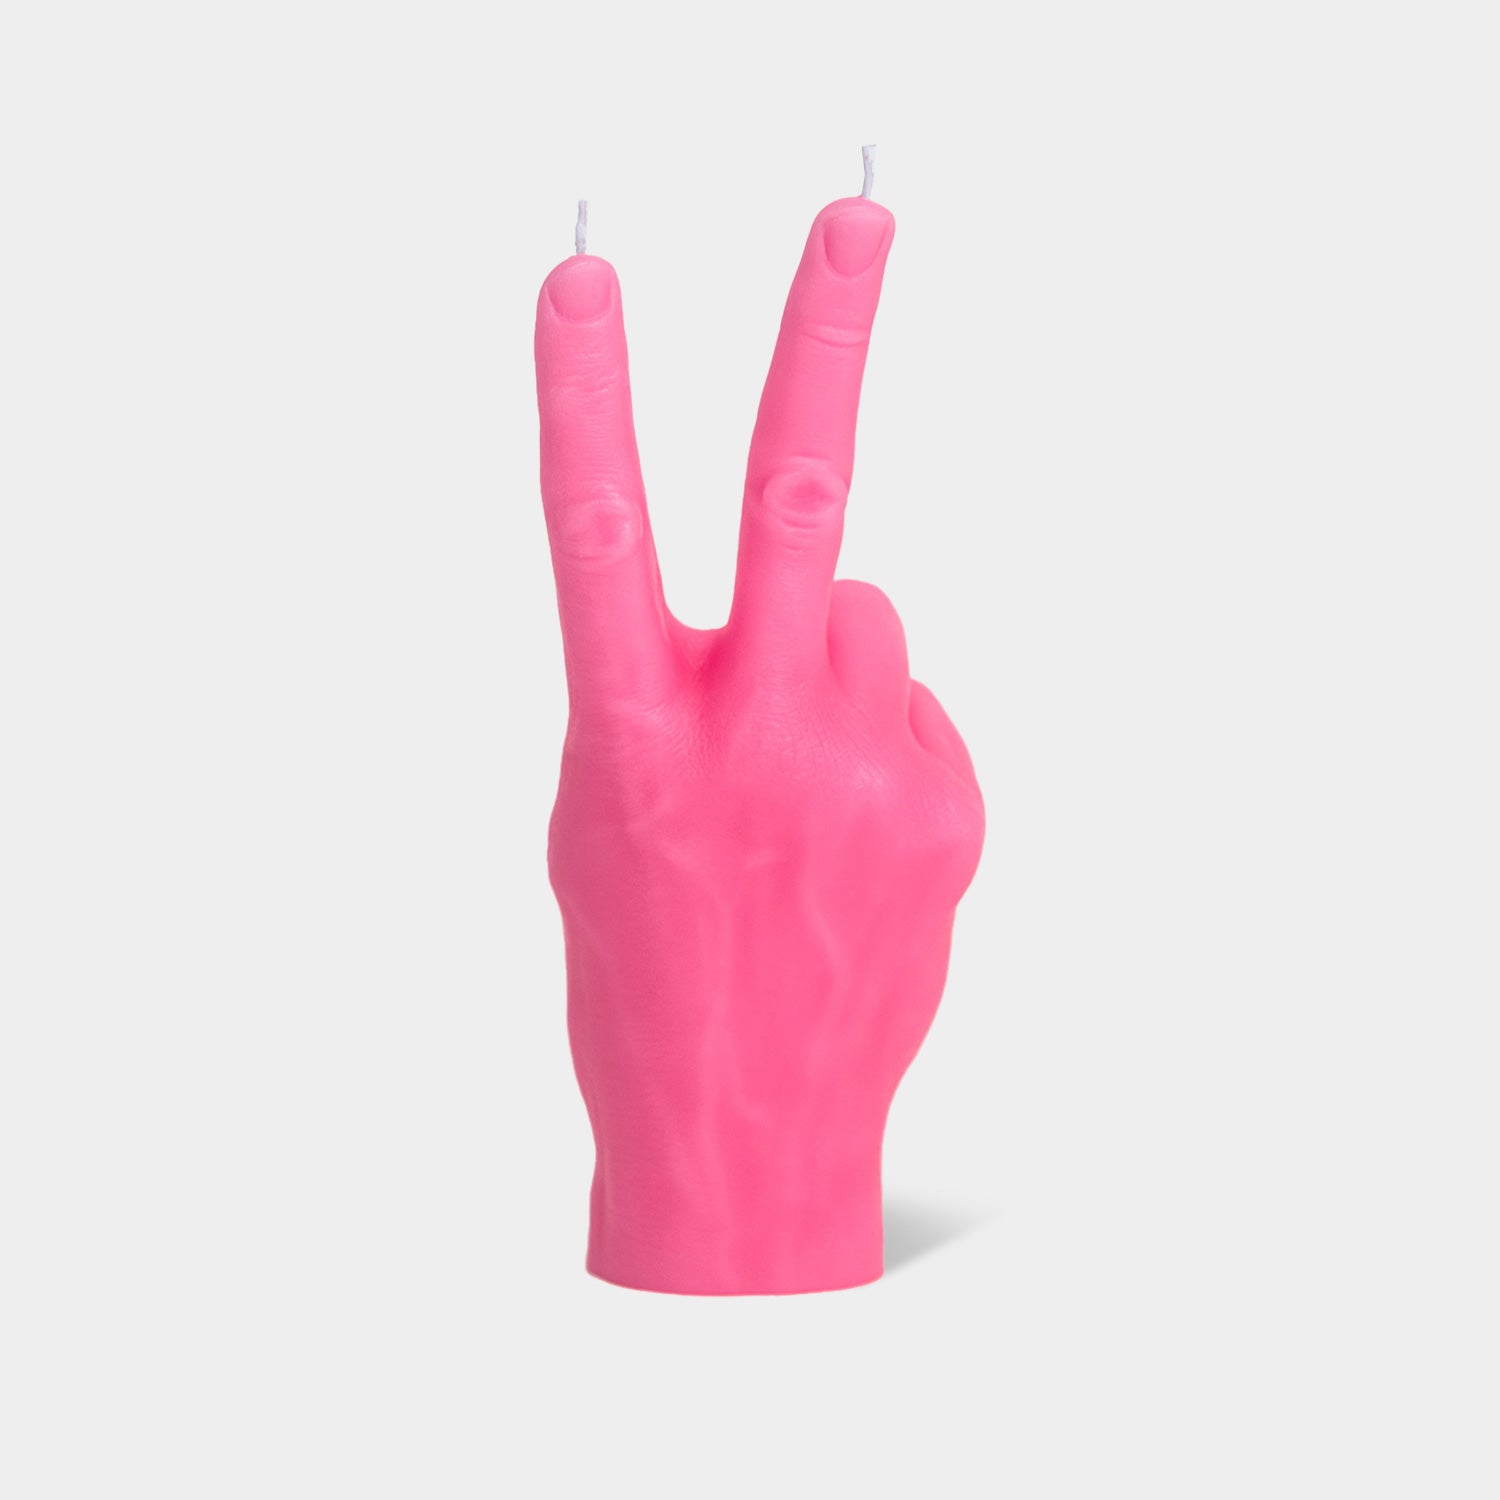 CandleHand "Peace" Candle - Pink